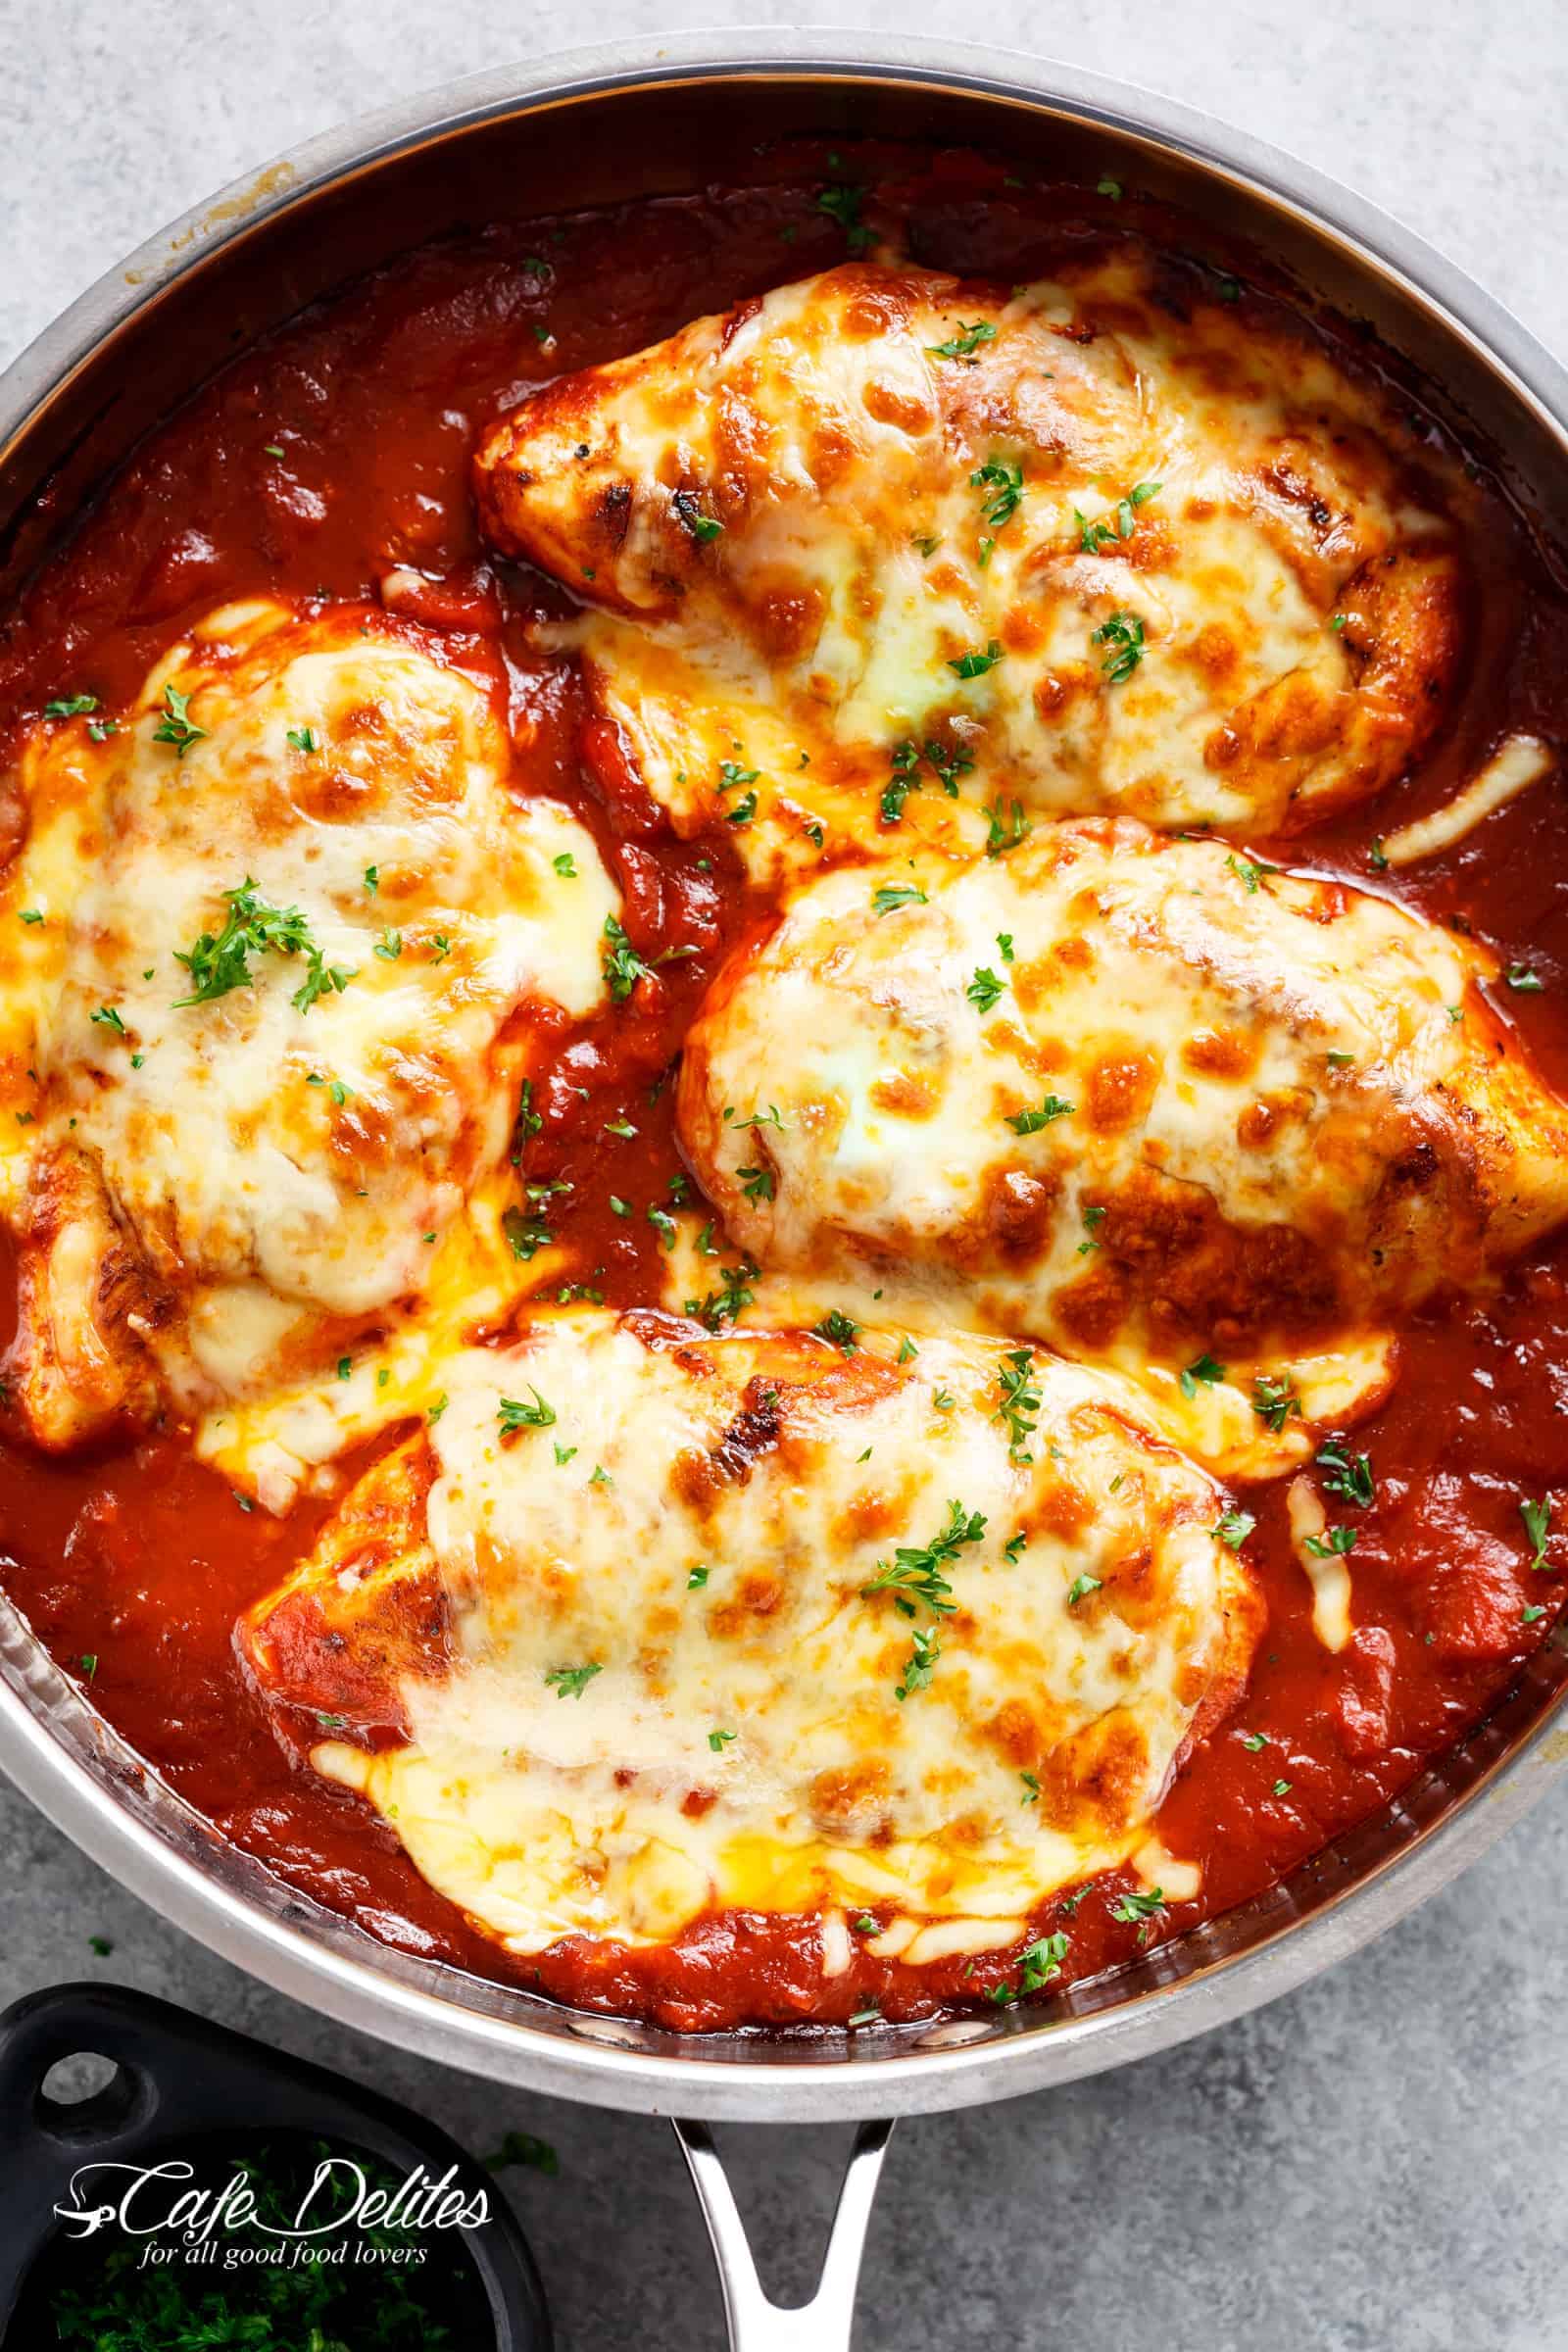 Easy Mozzarella Chicken is a low carb dream! Seasoned chicken simmered in a homemade tomato sauce, topped with melted mozzarella cheese! A 20-minute Low Carb Chicken Parmesan WITH NO BREADING! | cafedelites.com